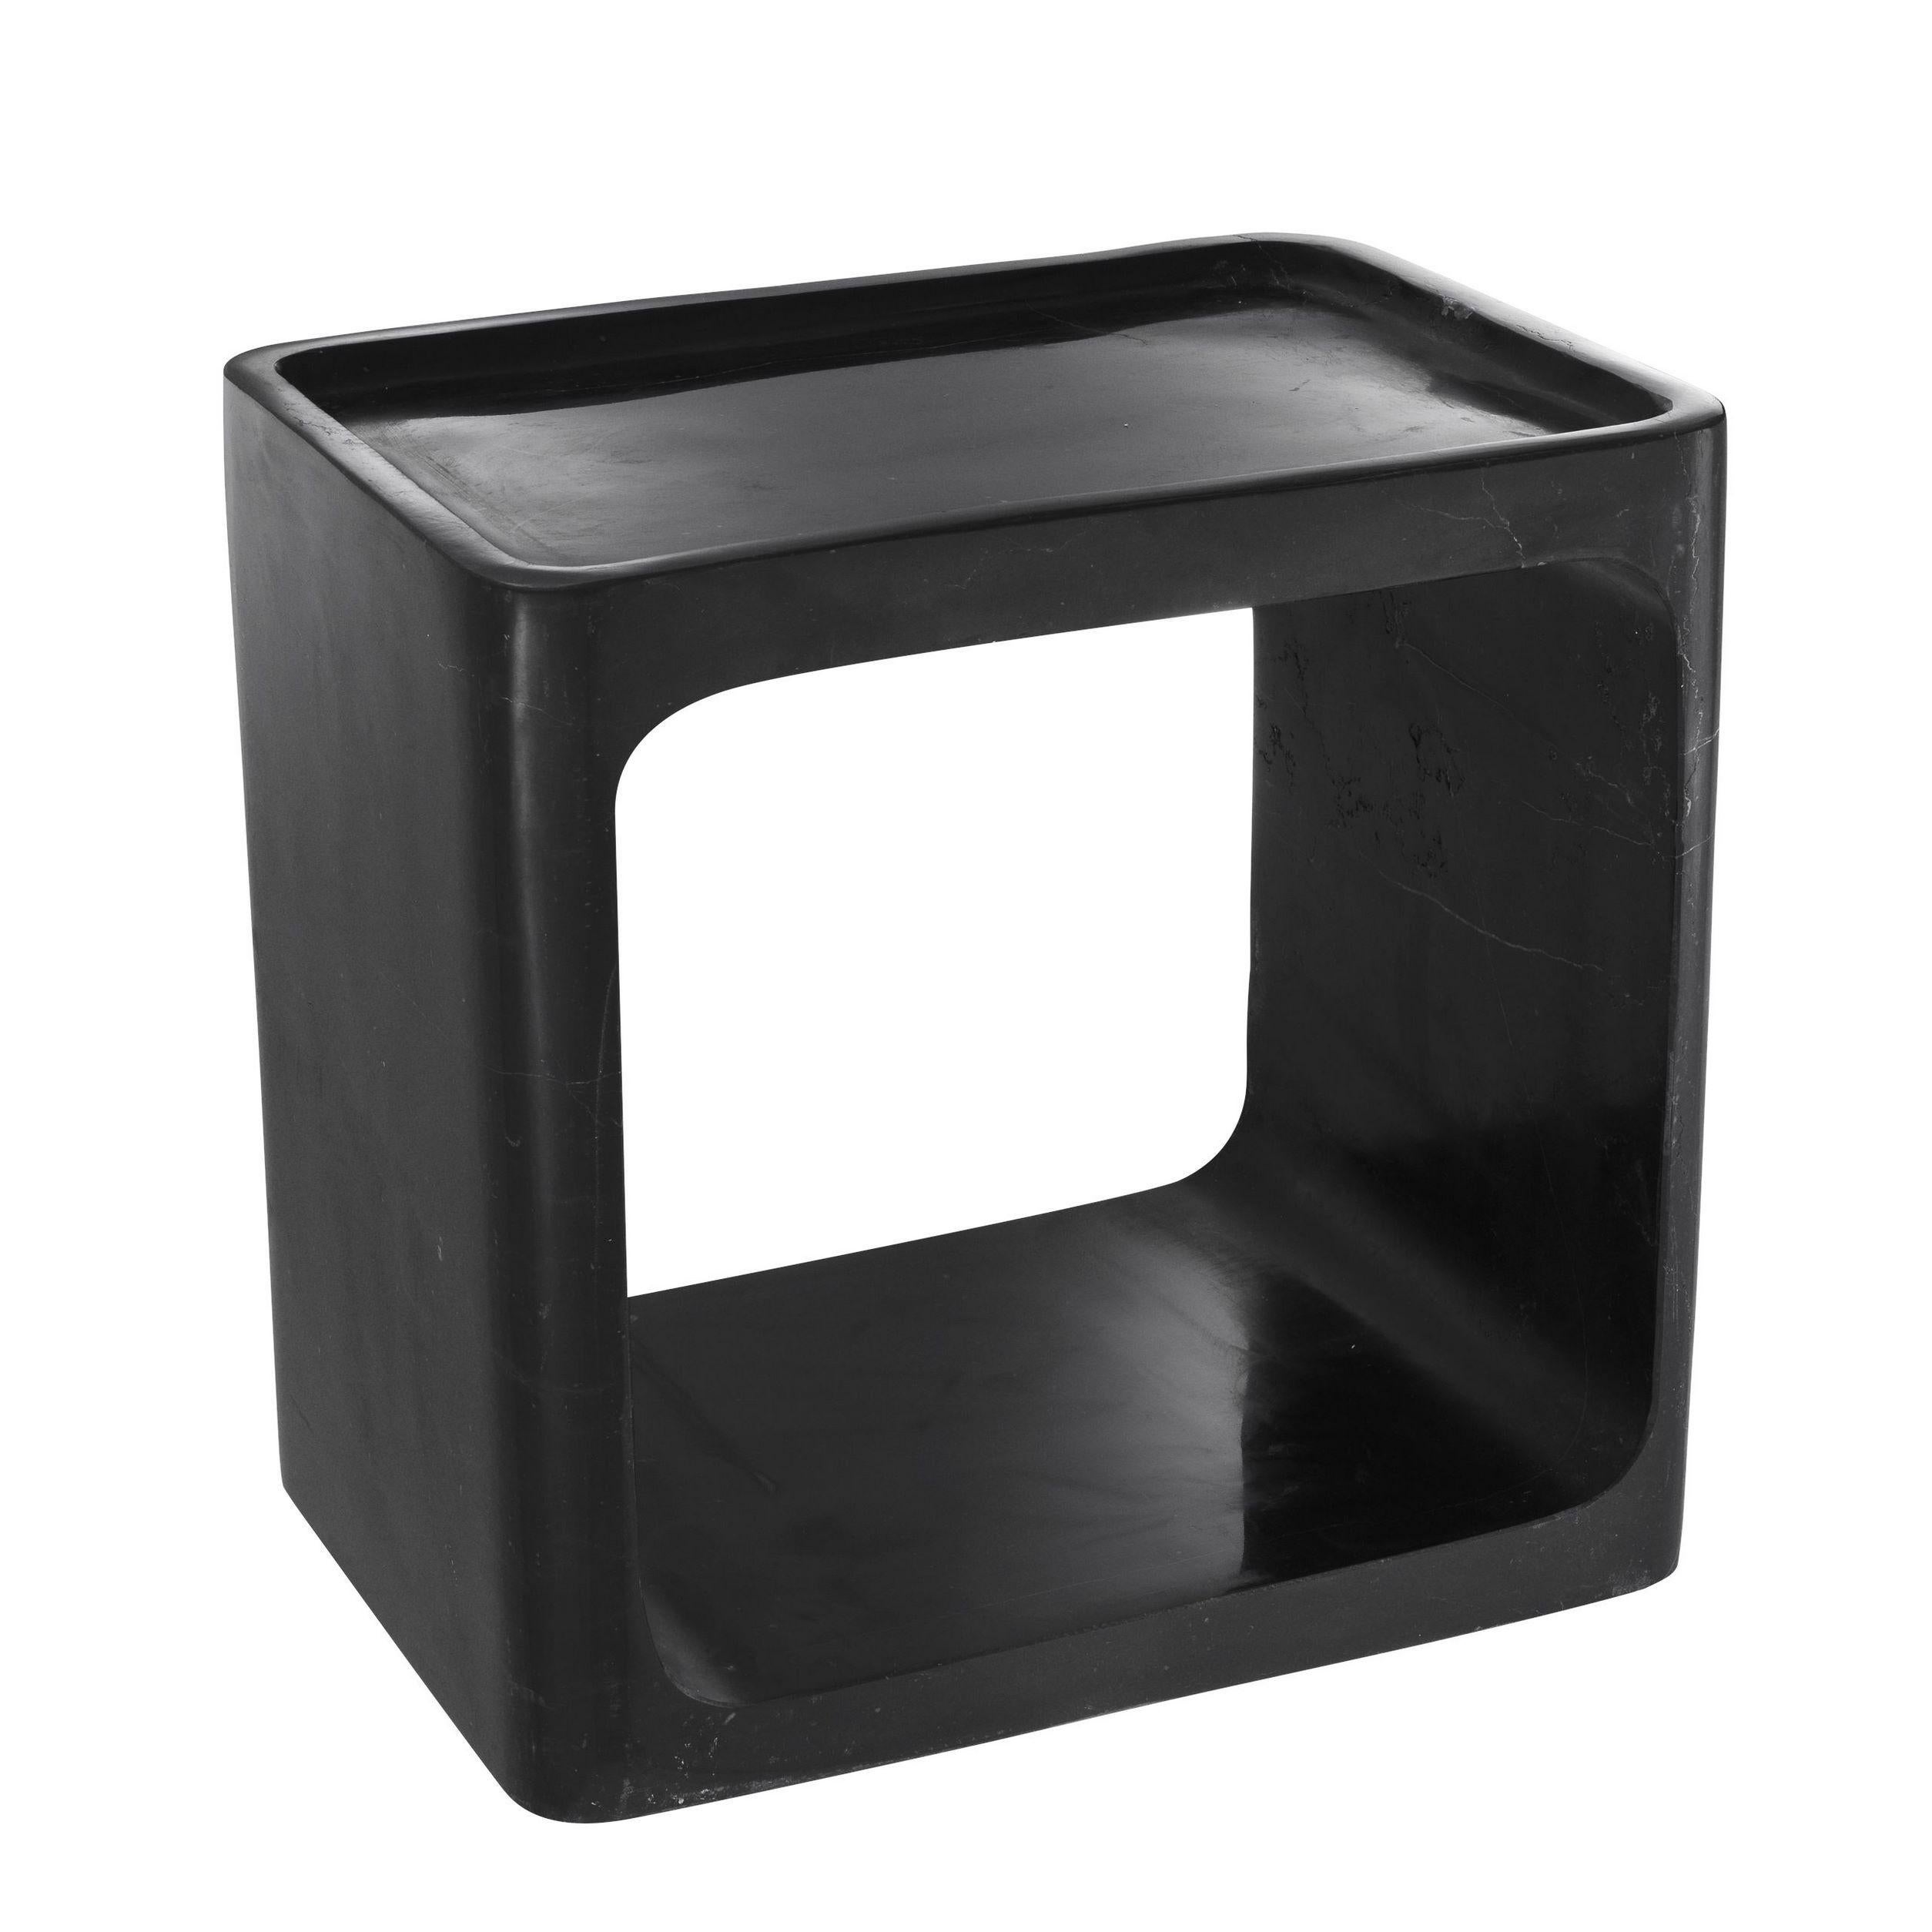 Graphic and Italian 1970s design style side table in solid black marble.